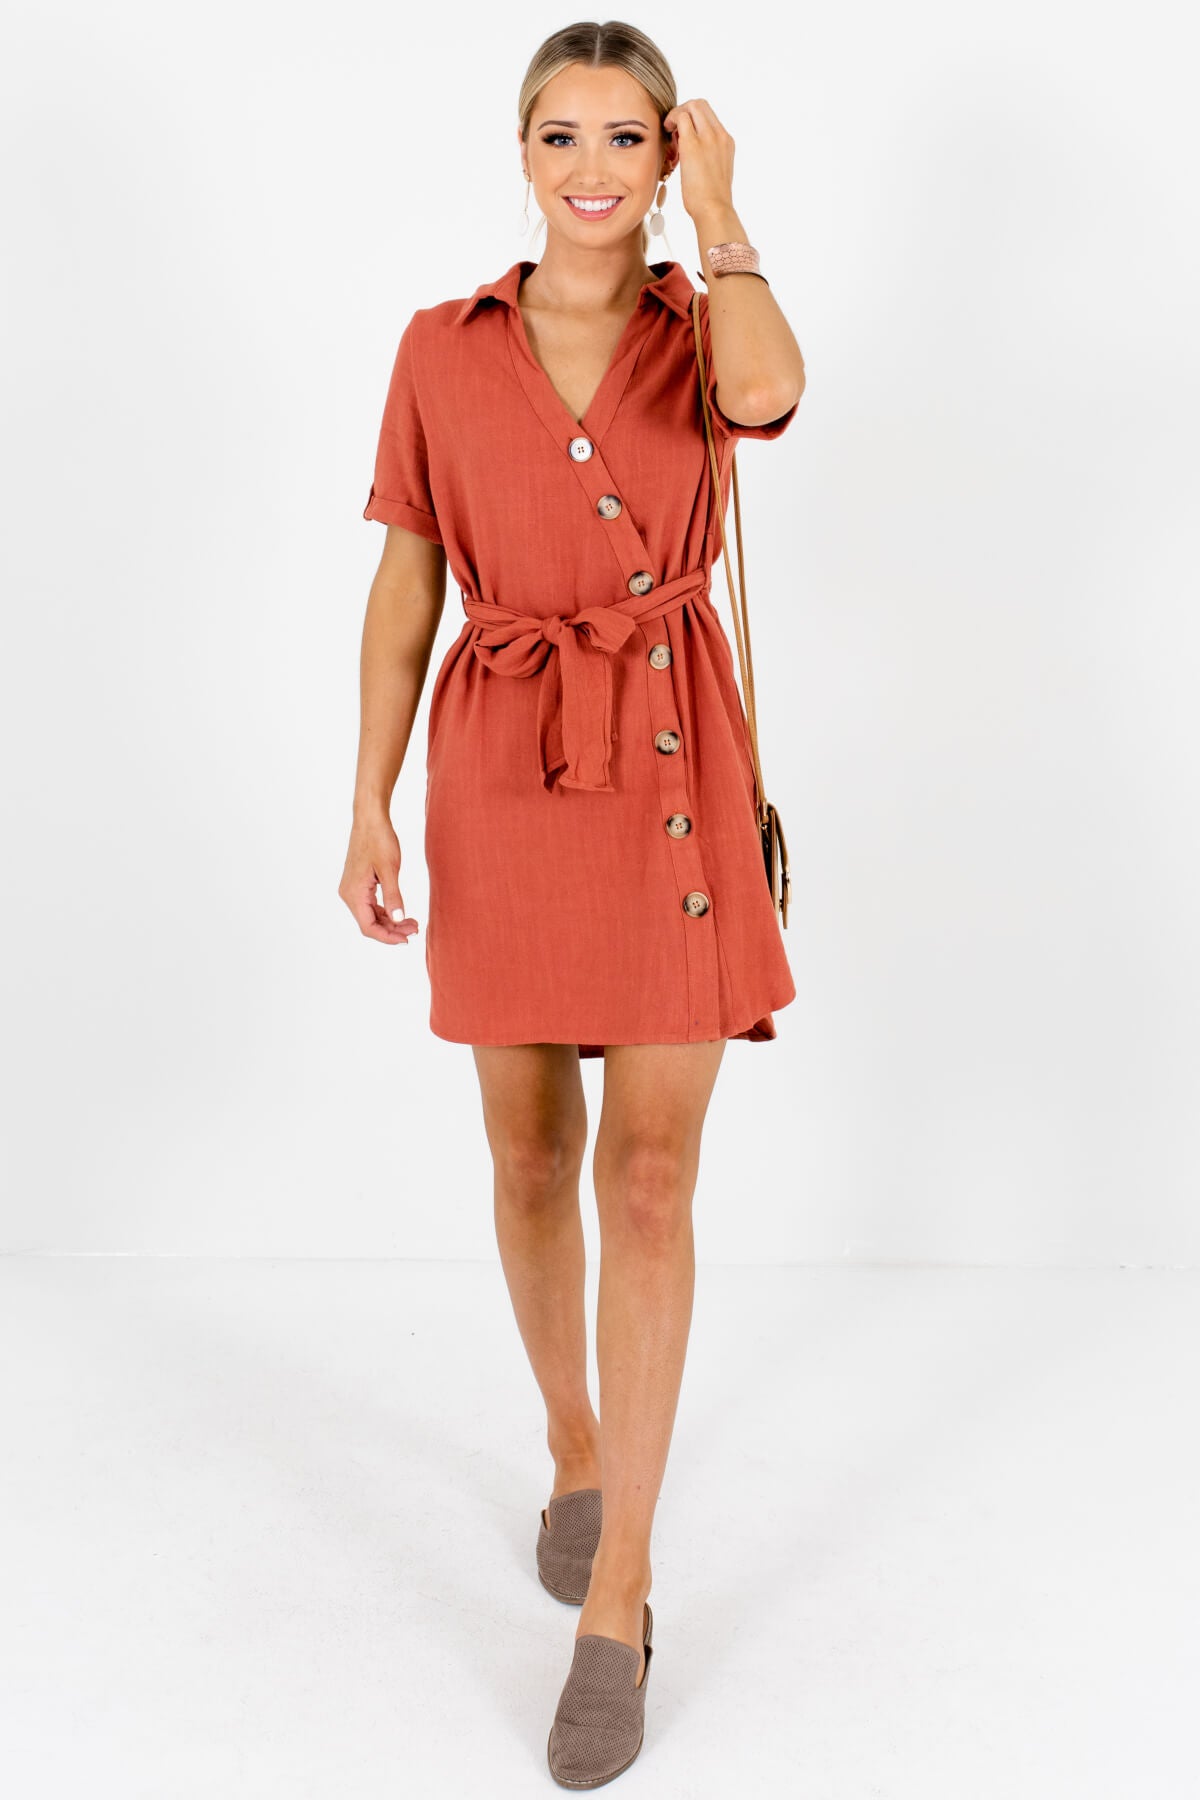 Rust Orange Asymmetrical Button-Up Mini Dresses for Summer and Fall